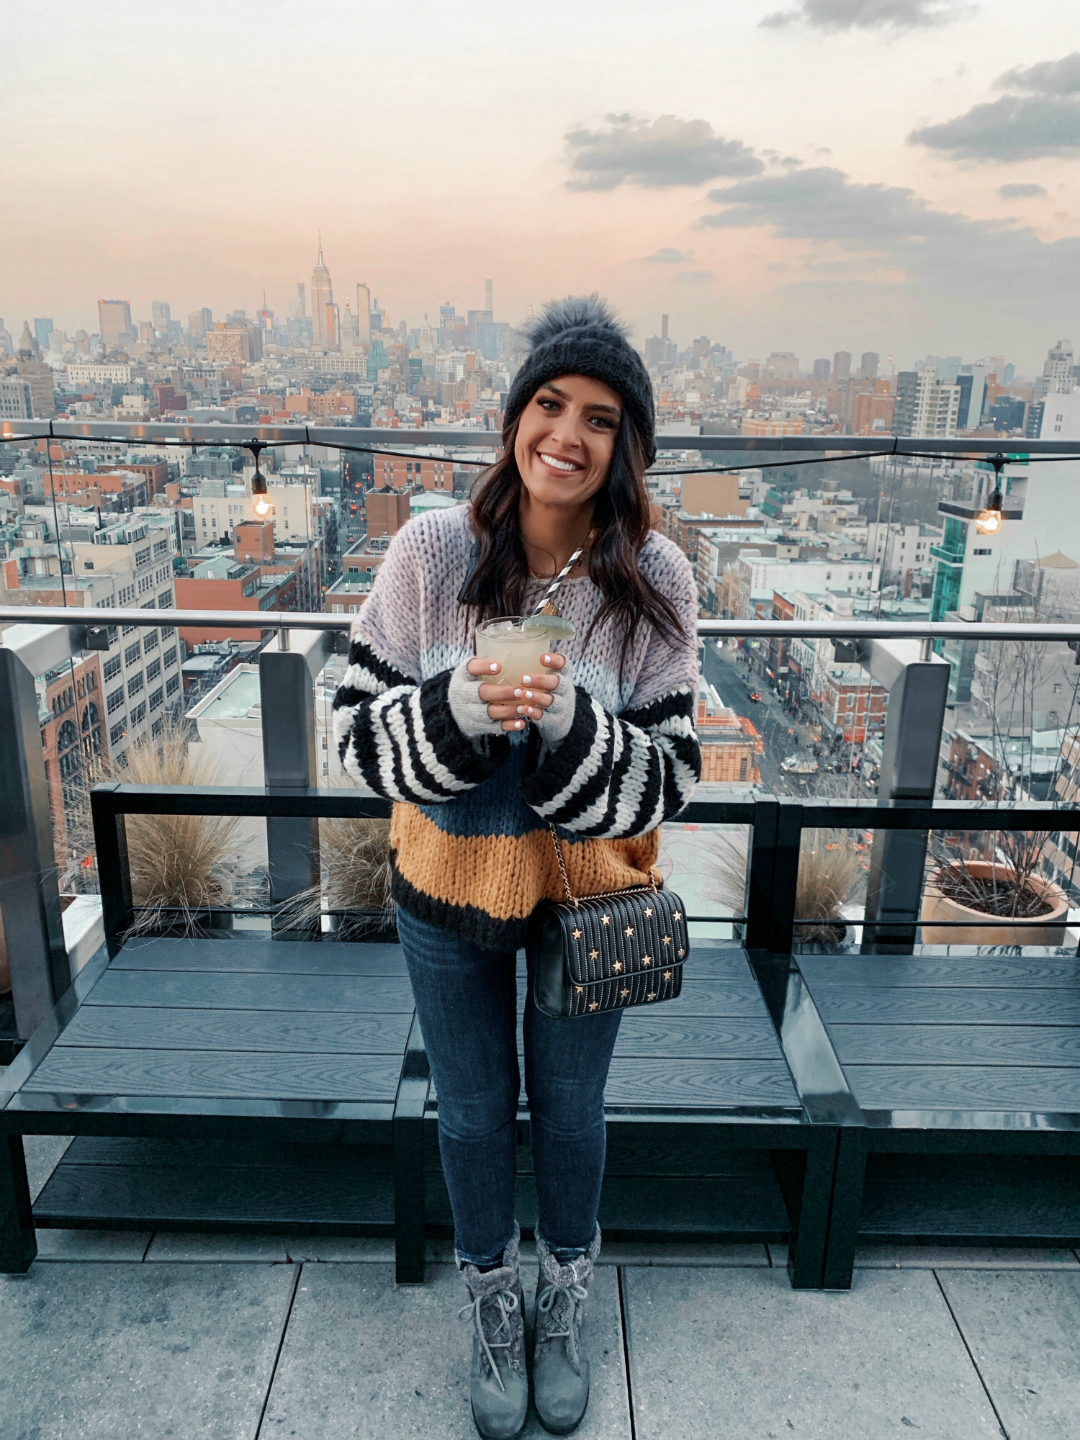 Blogger Sarah Lindner of The House of Sequins wearing Mixed Signals Mix Stripe Sweater from BlankNYC, Tory Burch Star-Stud bag, Kyi Kyi Beanie with genuine Fox Fur Pom and Sorel Joan of Arctic wedge boots. What to wear to NYC in the winter or Christmas time.